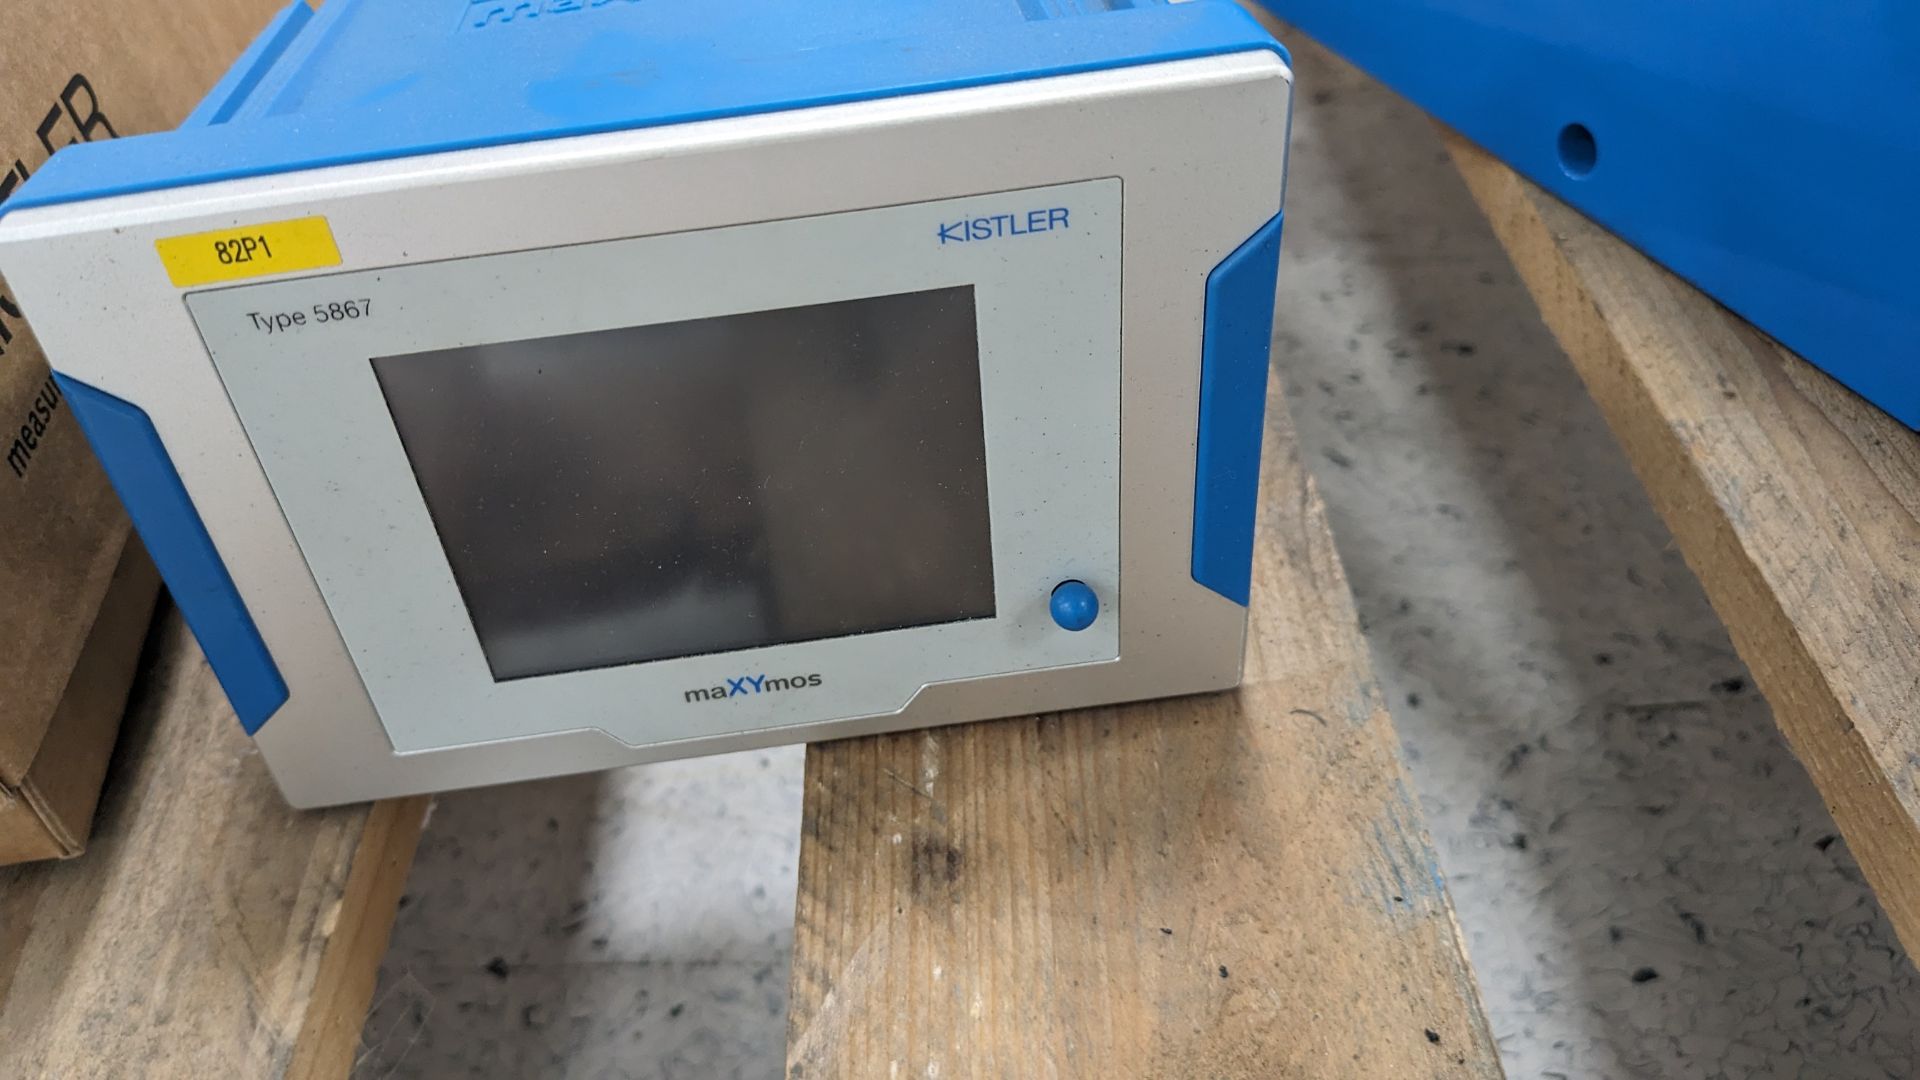 Pallet containging a Kistler electromechanical joining module NCFN 15 400 250 KG and associated Kist - Image 2 of 4